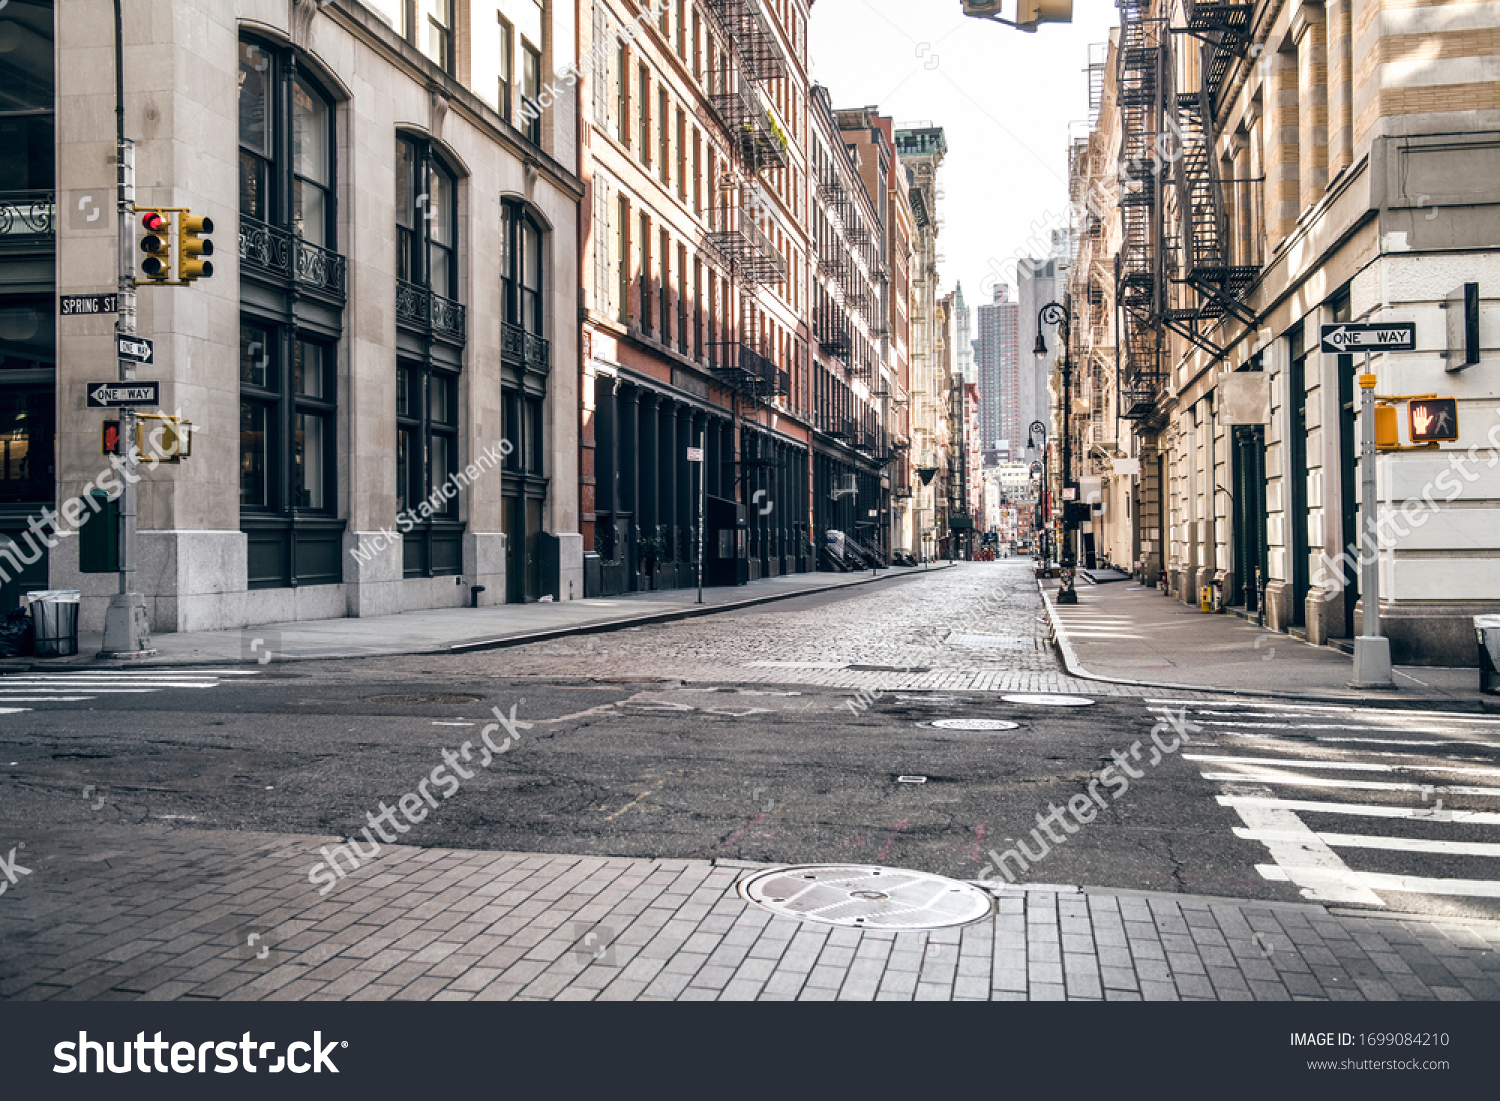 Empty street at sunset time in SoHo district in Manhattan, New York #1699084210